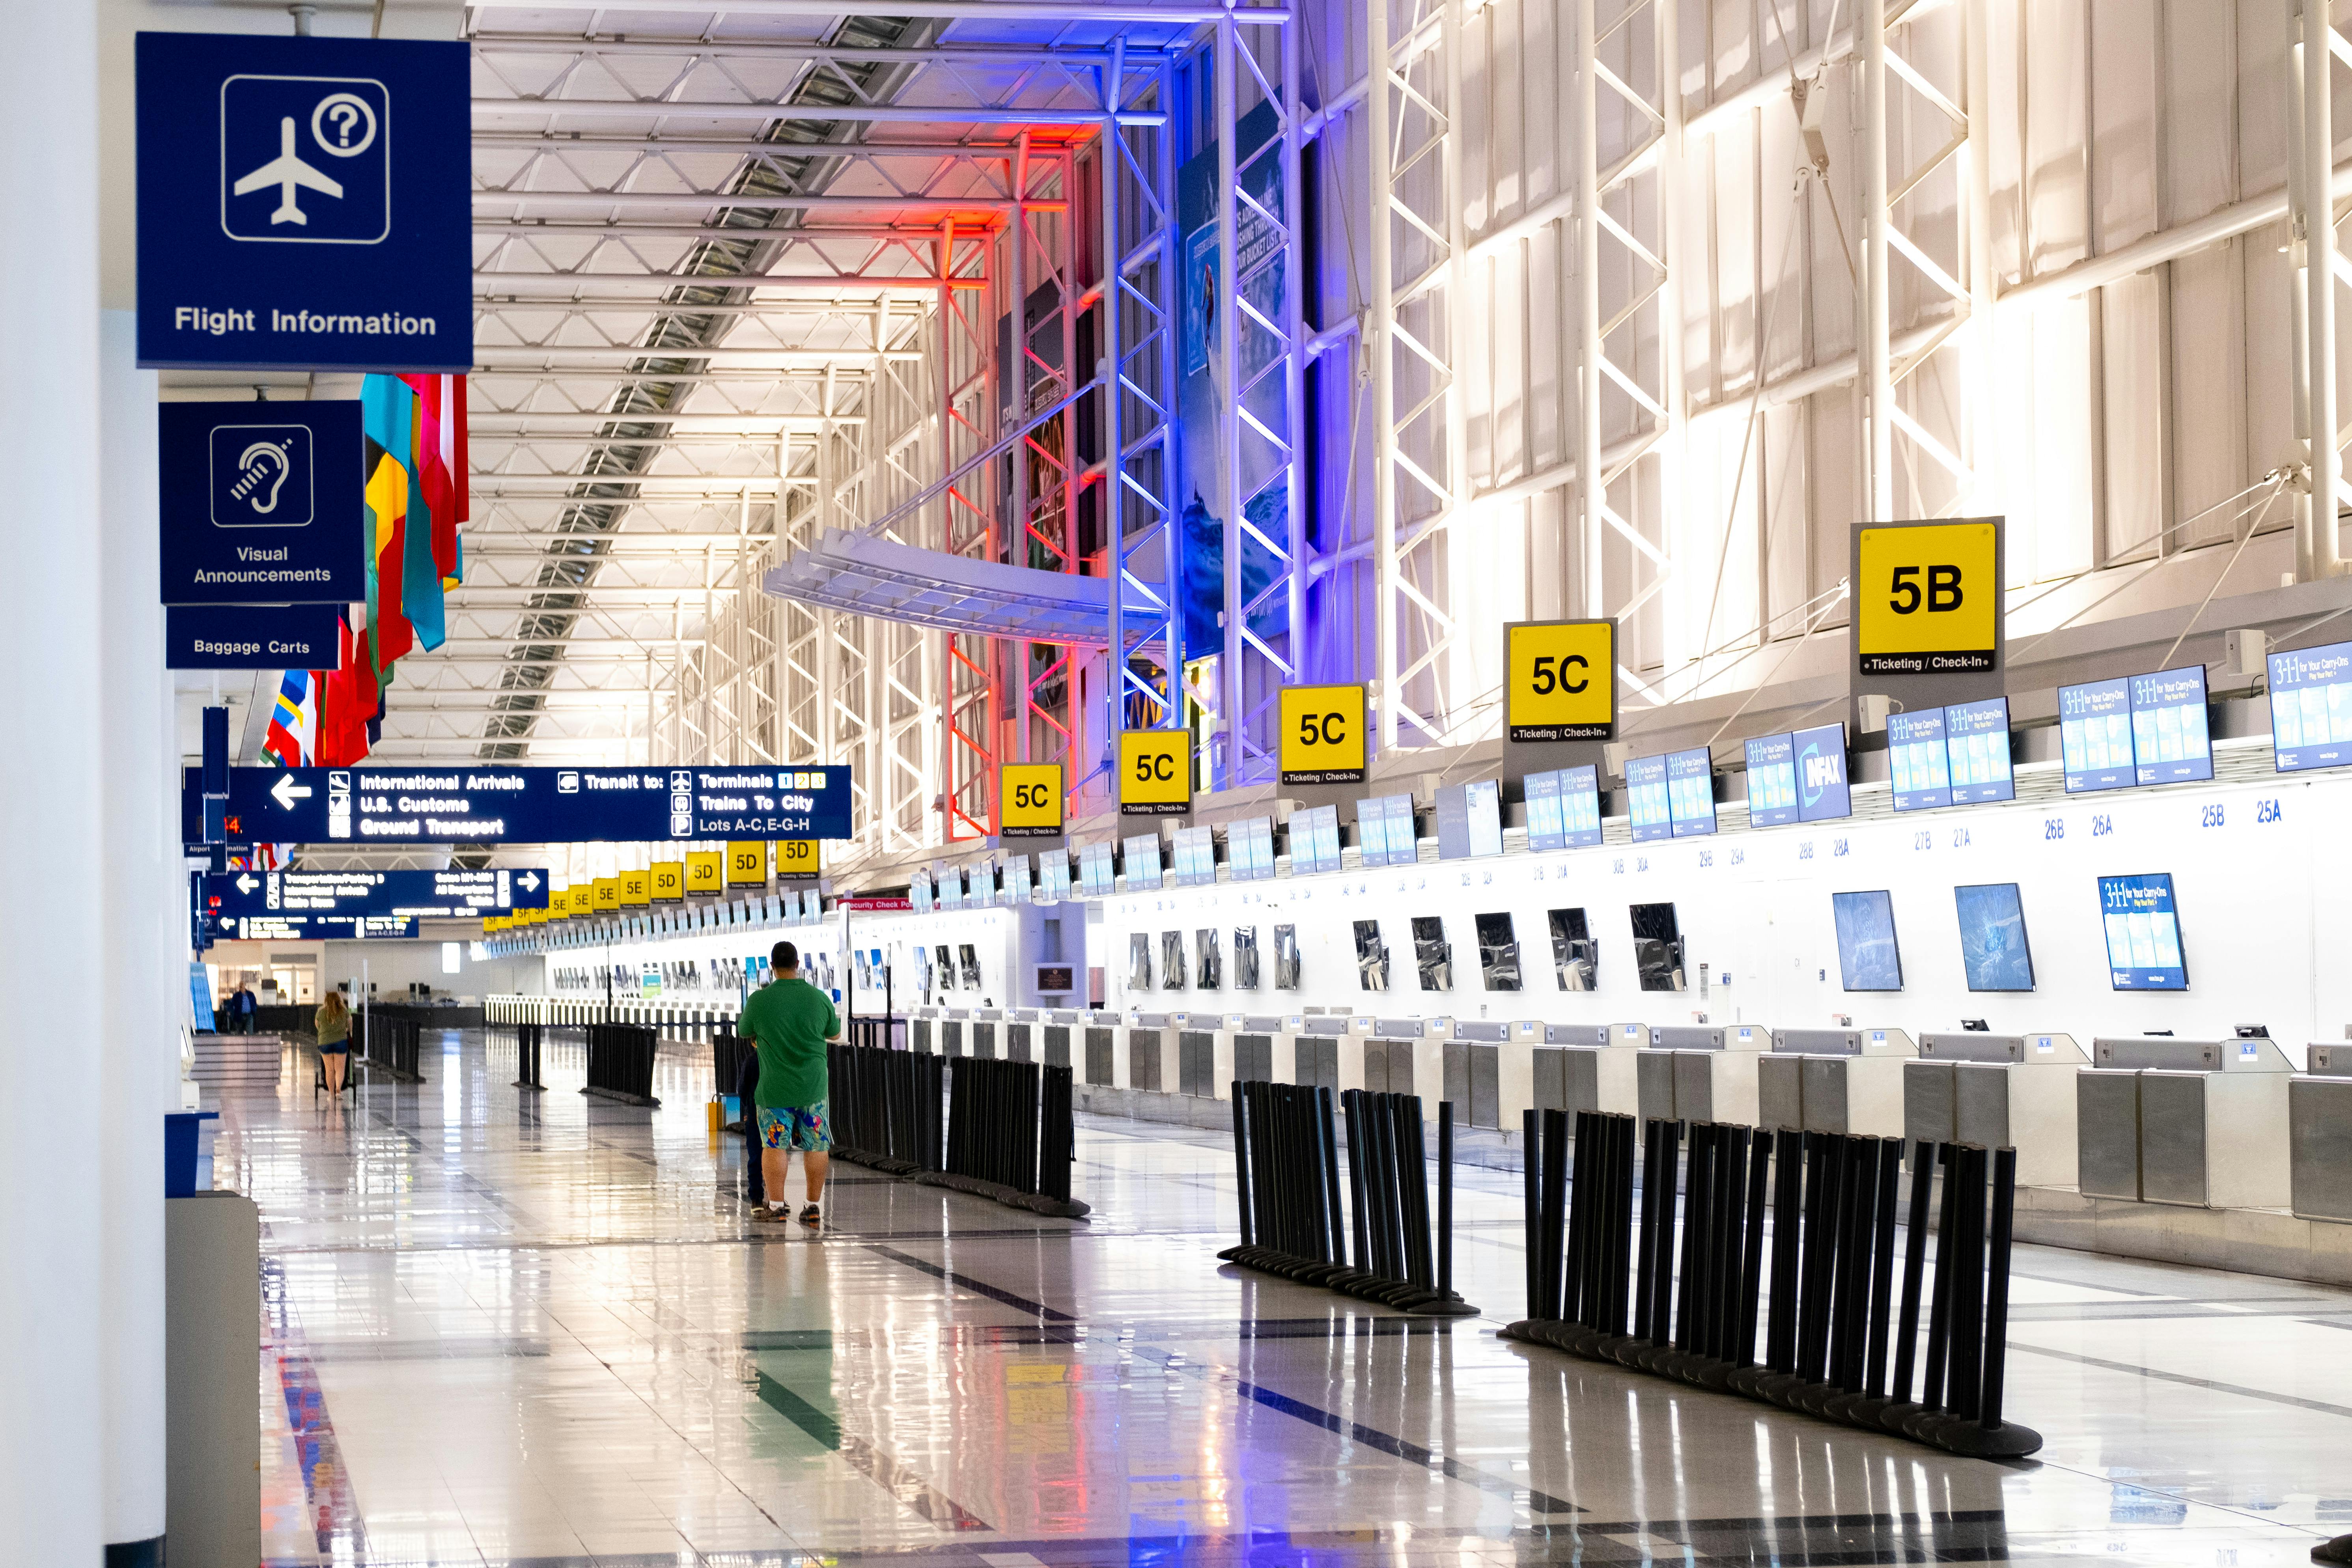 Airport Photos, Download The BEST Free Airport Stock Photos & HD Images